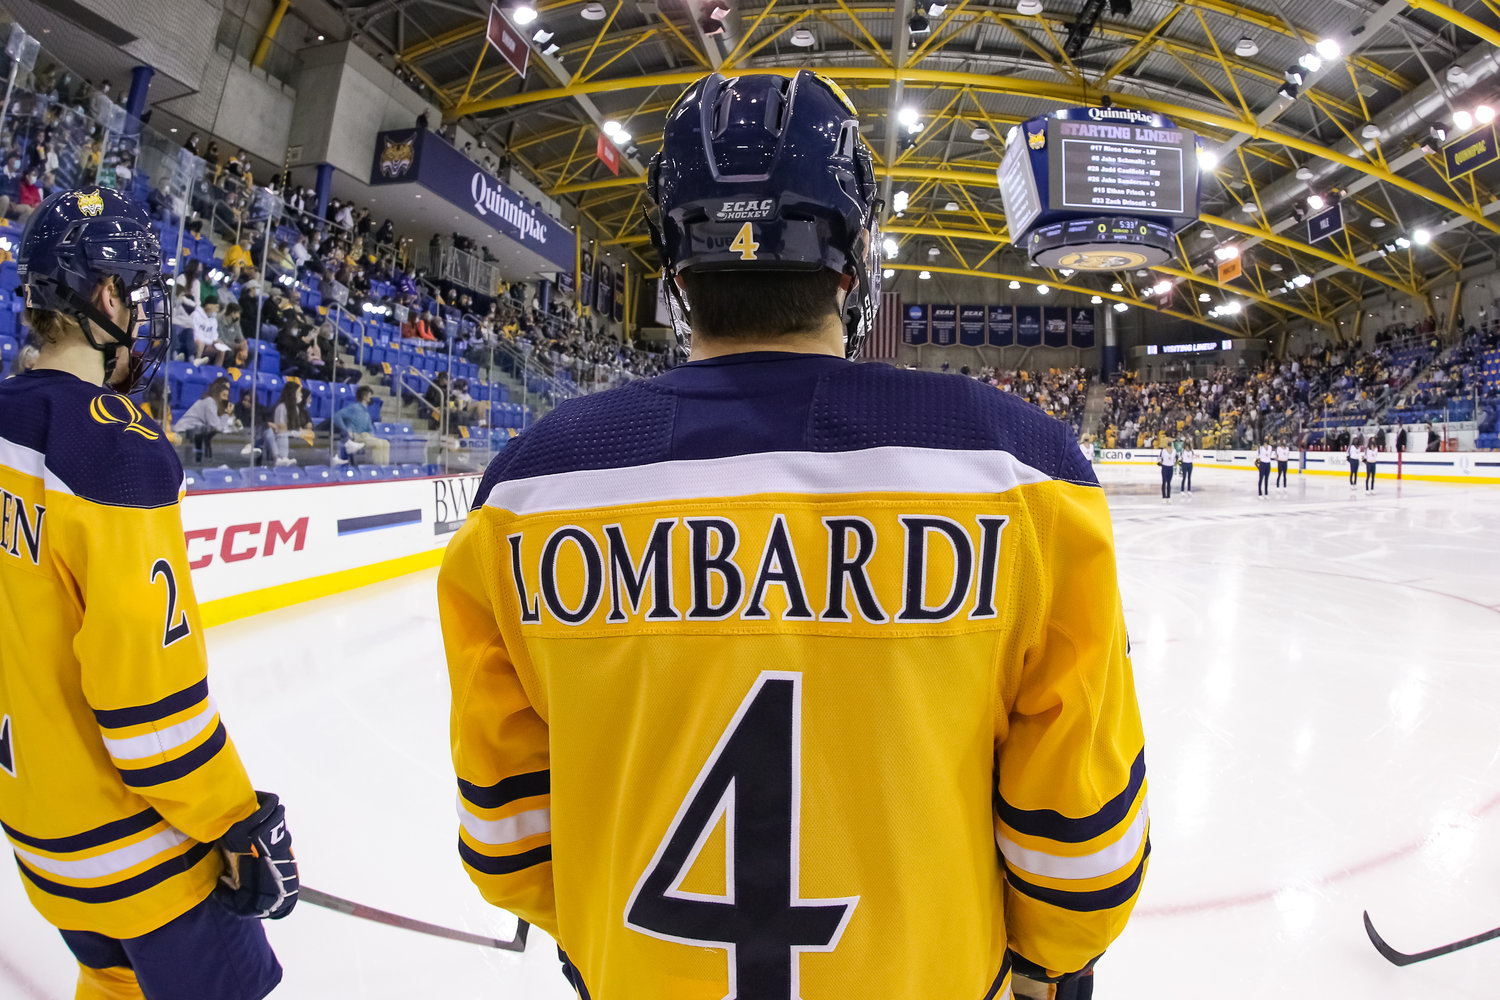 Barrington’s Mike Lombardi looks over the ice at Quinnipiac College. Lombardi has helped the team to a 16-1-3 record this season.